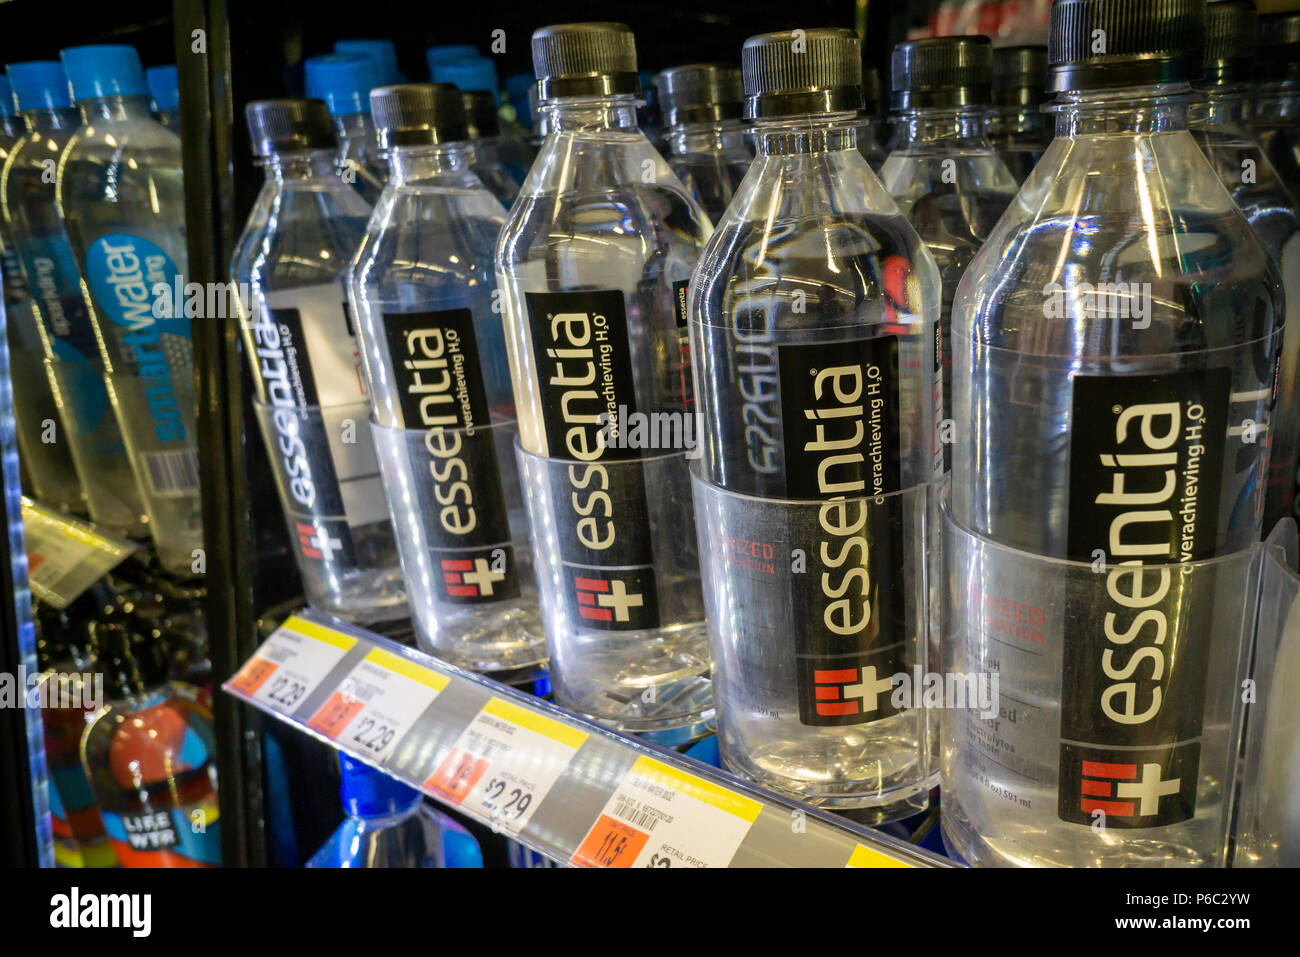 Bottles of Essentia and other waters in a cooler in a convenience store in New York on Thursday, June 14, 2018. Essentia, one of players in the functional water space, has hired Credit Suisse to run an auction of the company hoping to attract a larger beverage brand such as PepsiCo or Nestle. Essentia claims superior hydration due to a proprietary method of ionizing the water. (© Richard B. Levine) Stock Photo